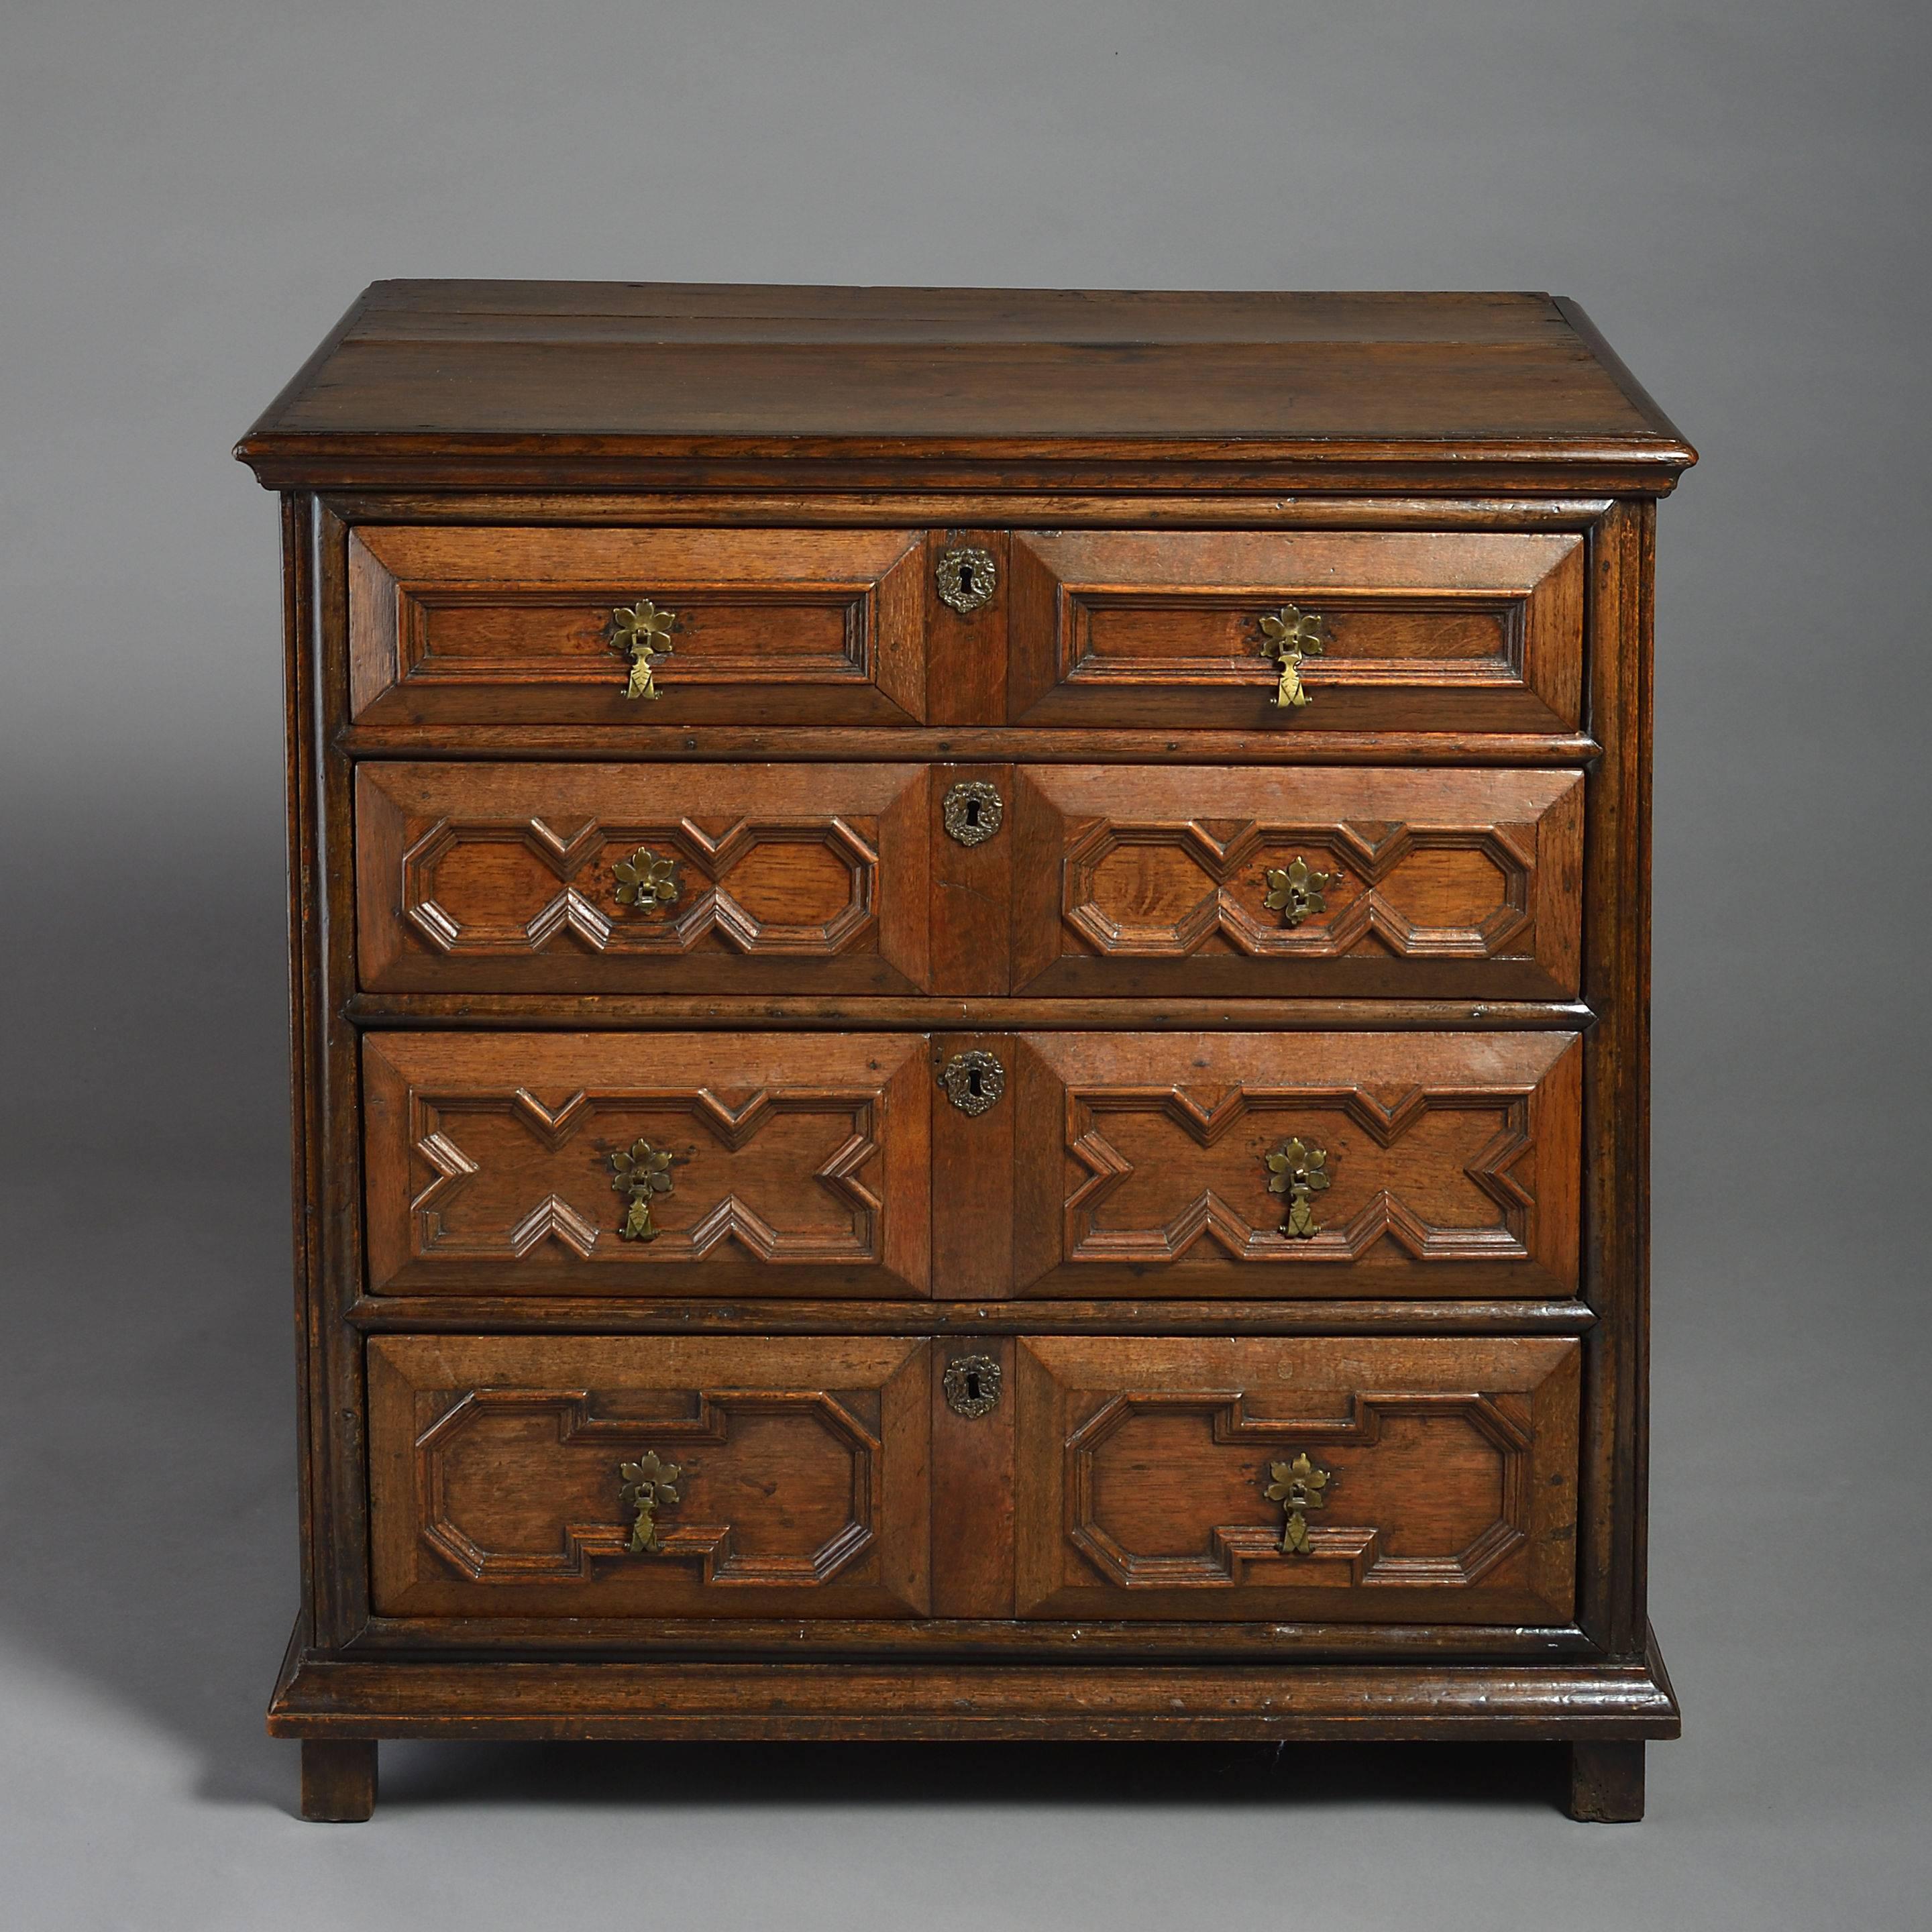 A late 17th century Charles II period oak chest of drawers, the overhanging top above four drawers, each with geometric mouldings, drop handles and lock escutcheons.